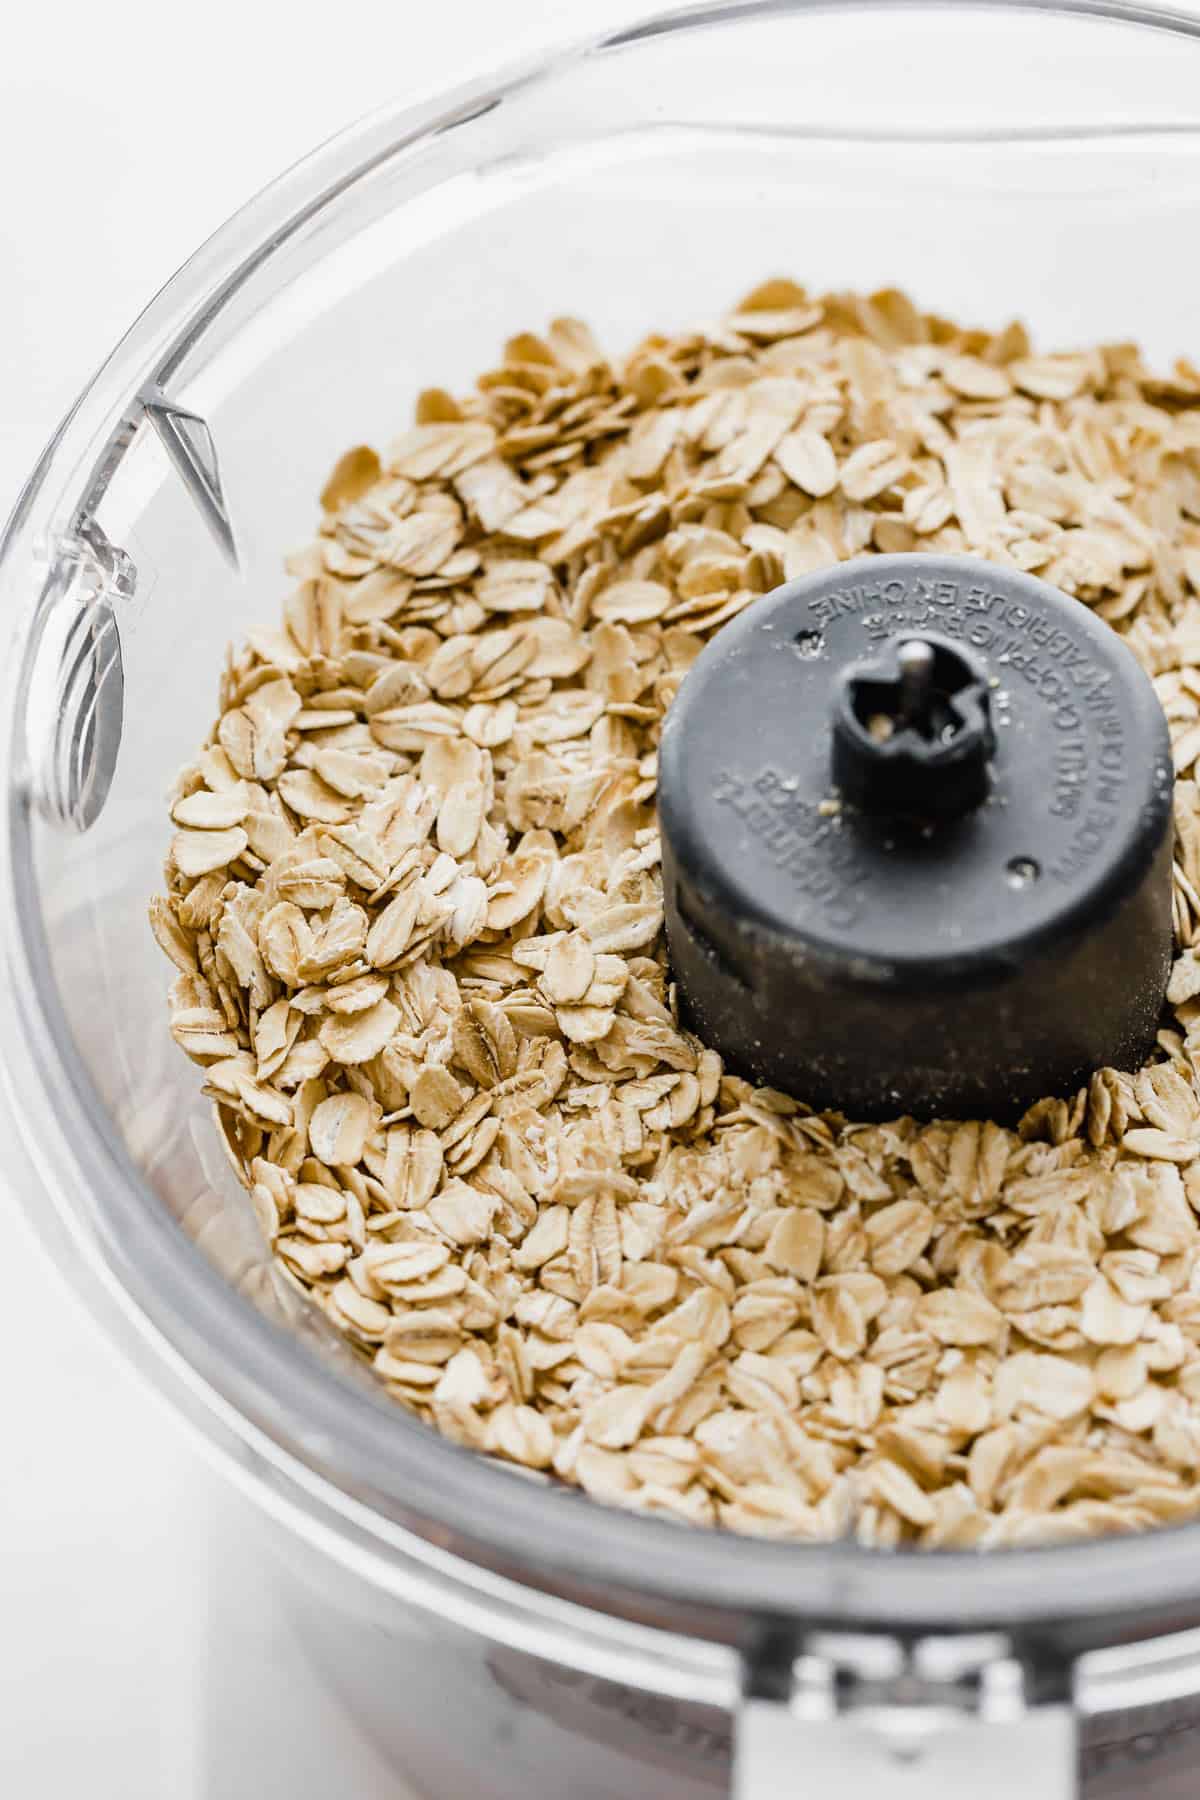 Old fashioned rolled oats in a food processor.